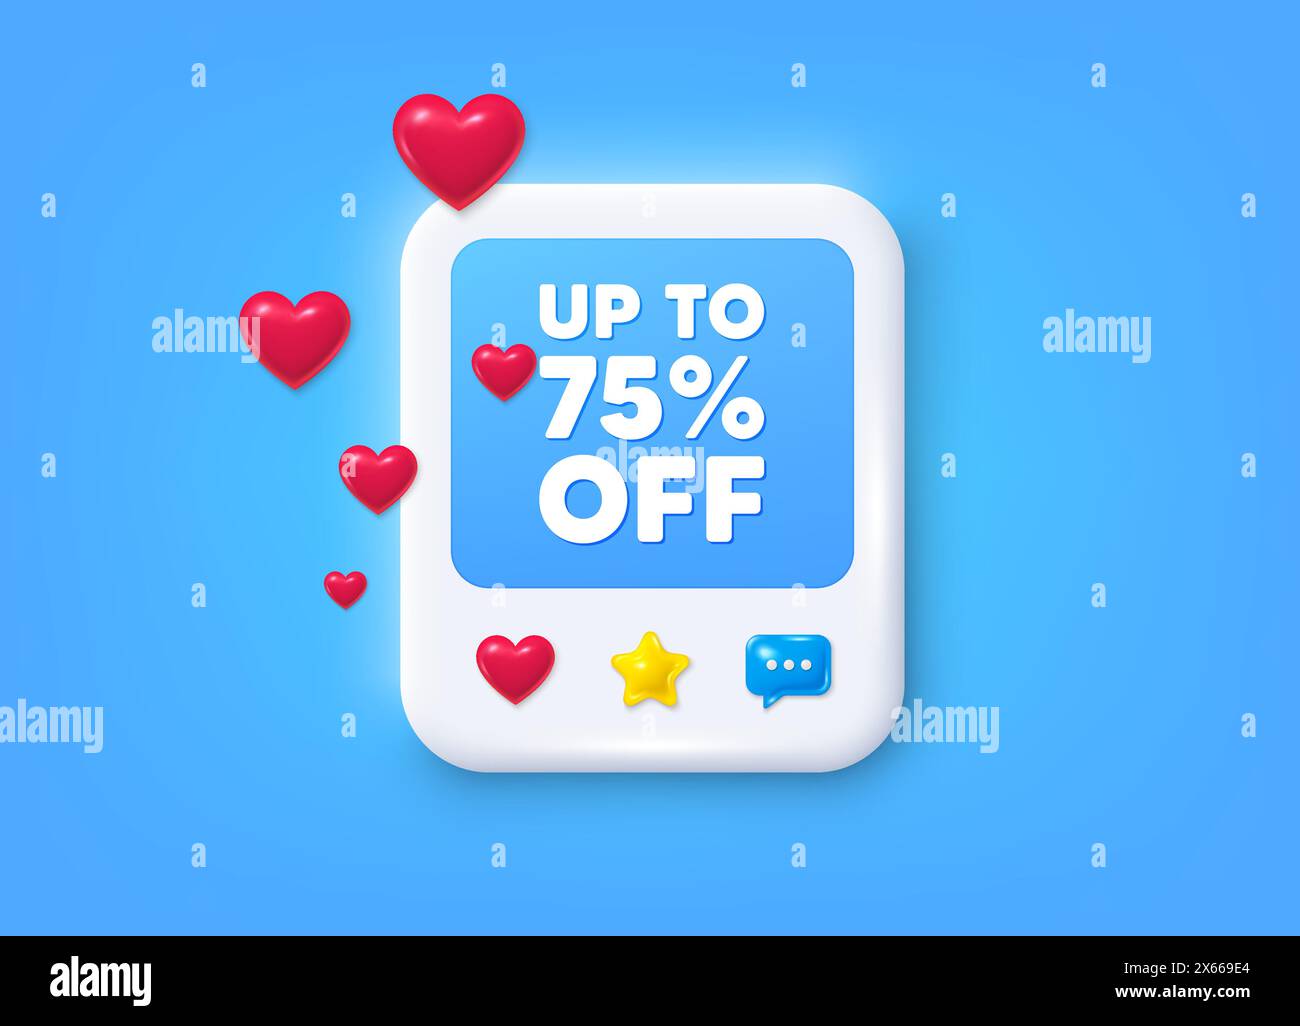 Up to 75 percent off sale. Discount offer price sign. Social media post 3d frame. Vector Stock Vector